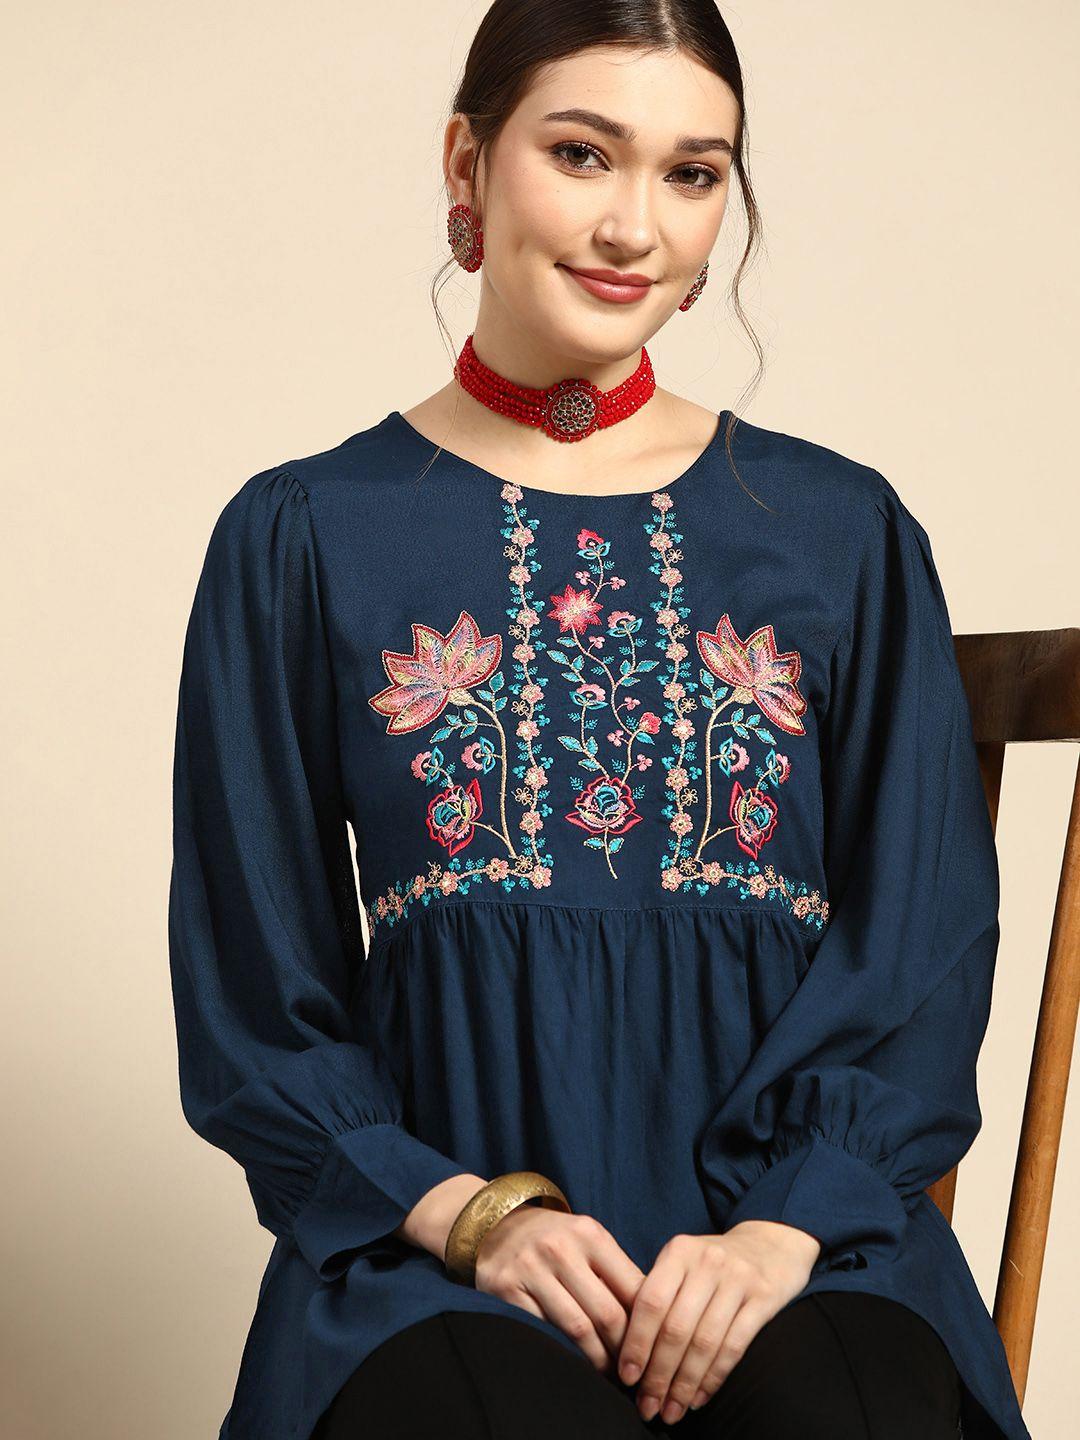 sangria-teal-blue-&-green-ethnic-motifs-embroidered-top